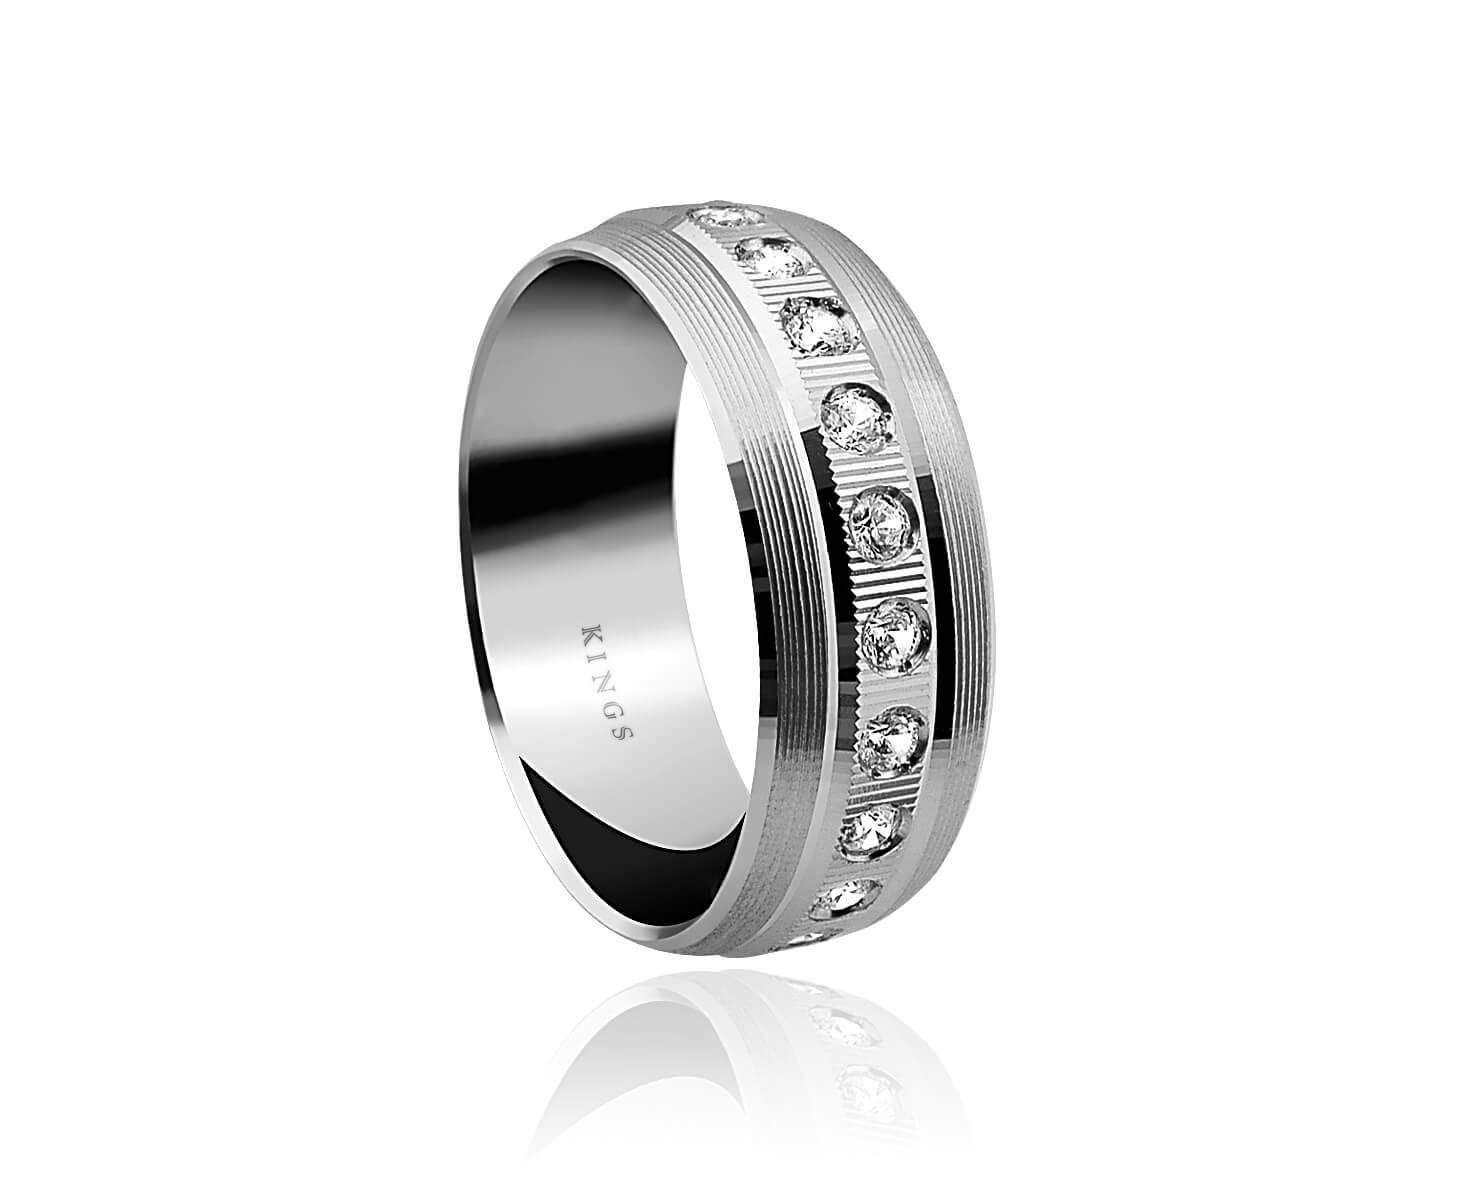 Men's Diamond Ring 8.50mm White Gold Ring with approximately 1 carat of brilliant cut diamonds